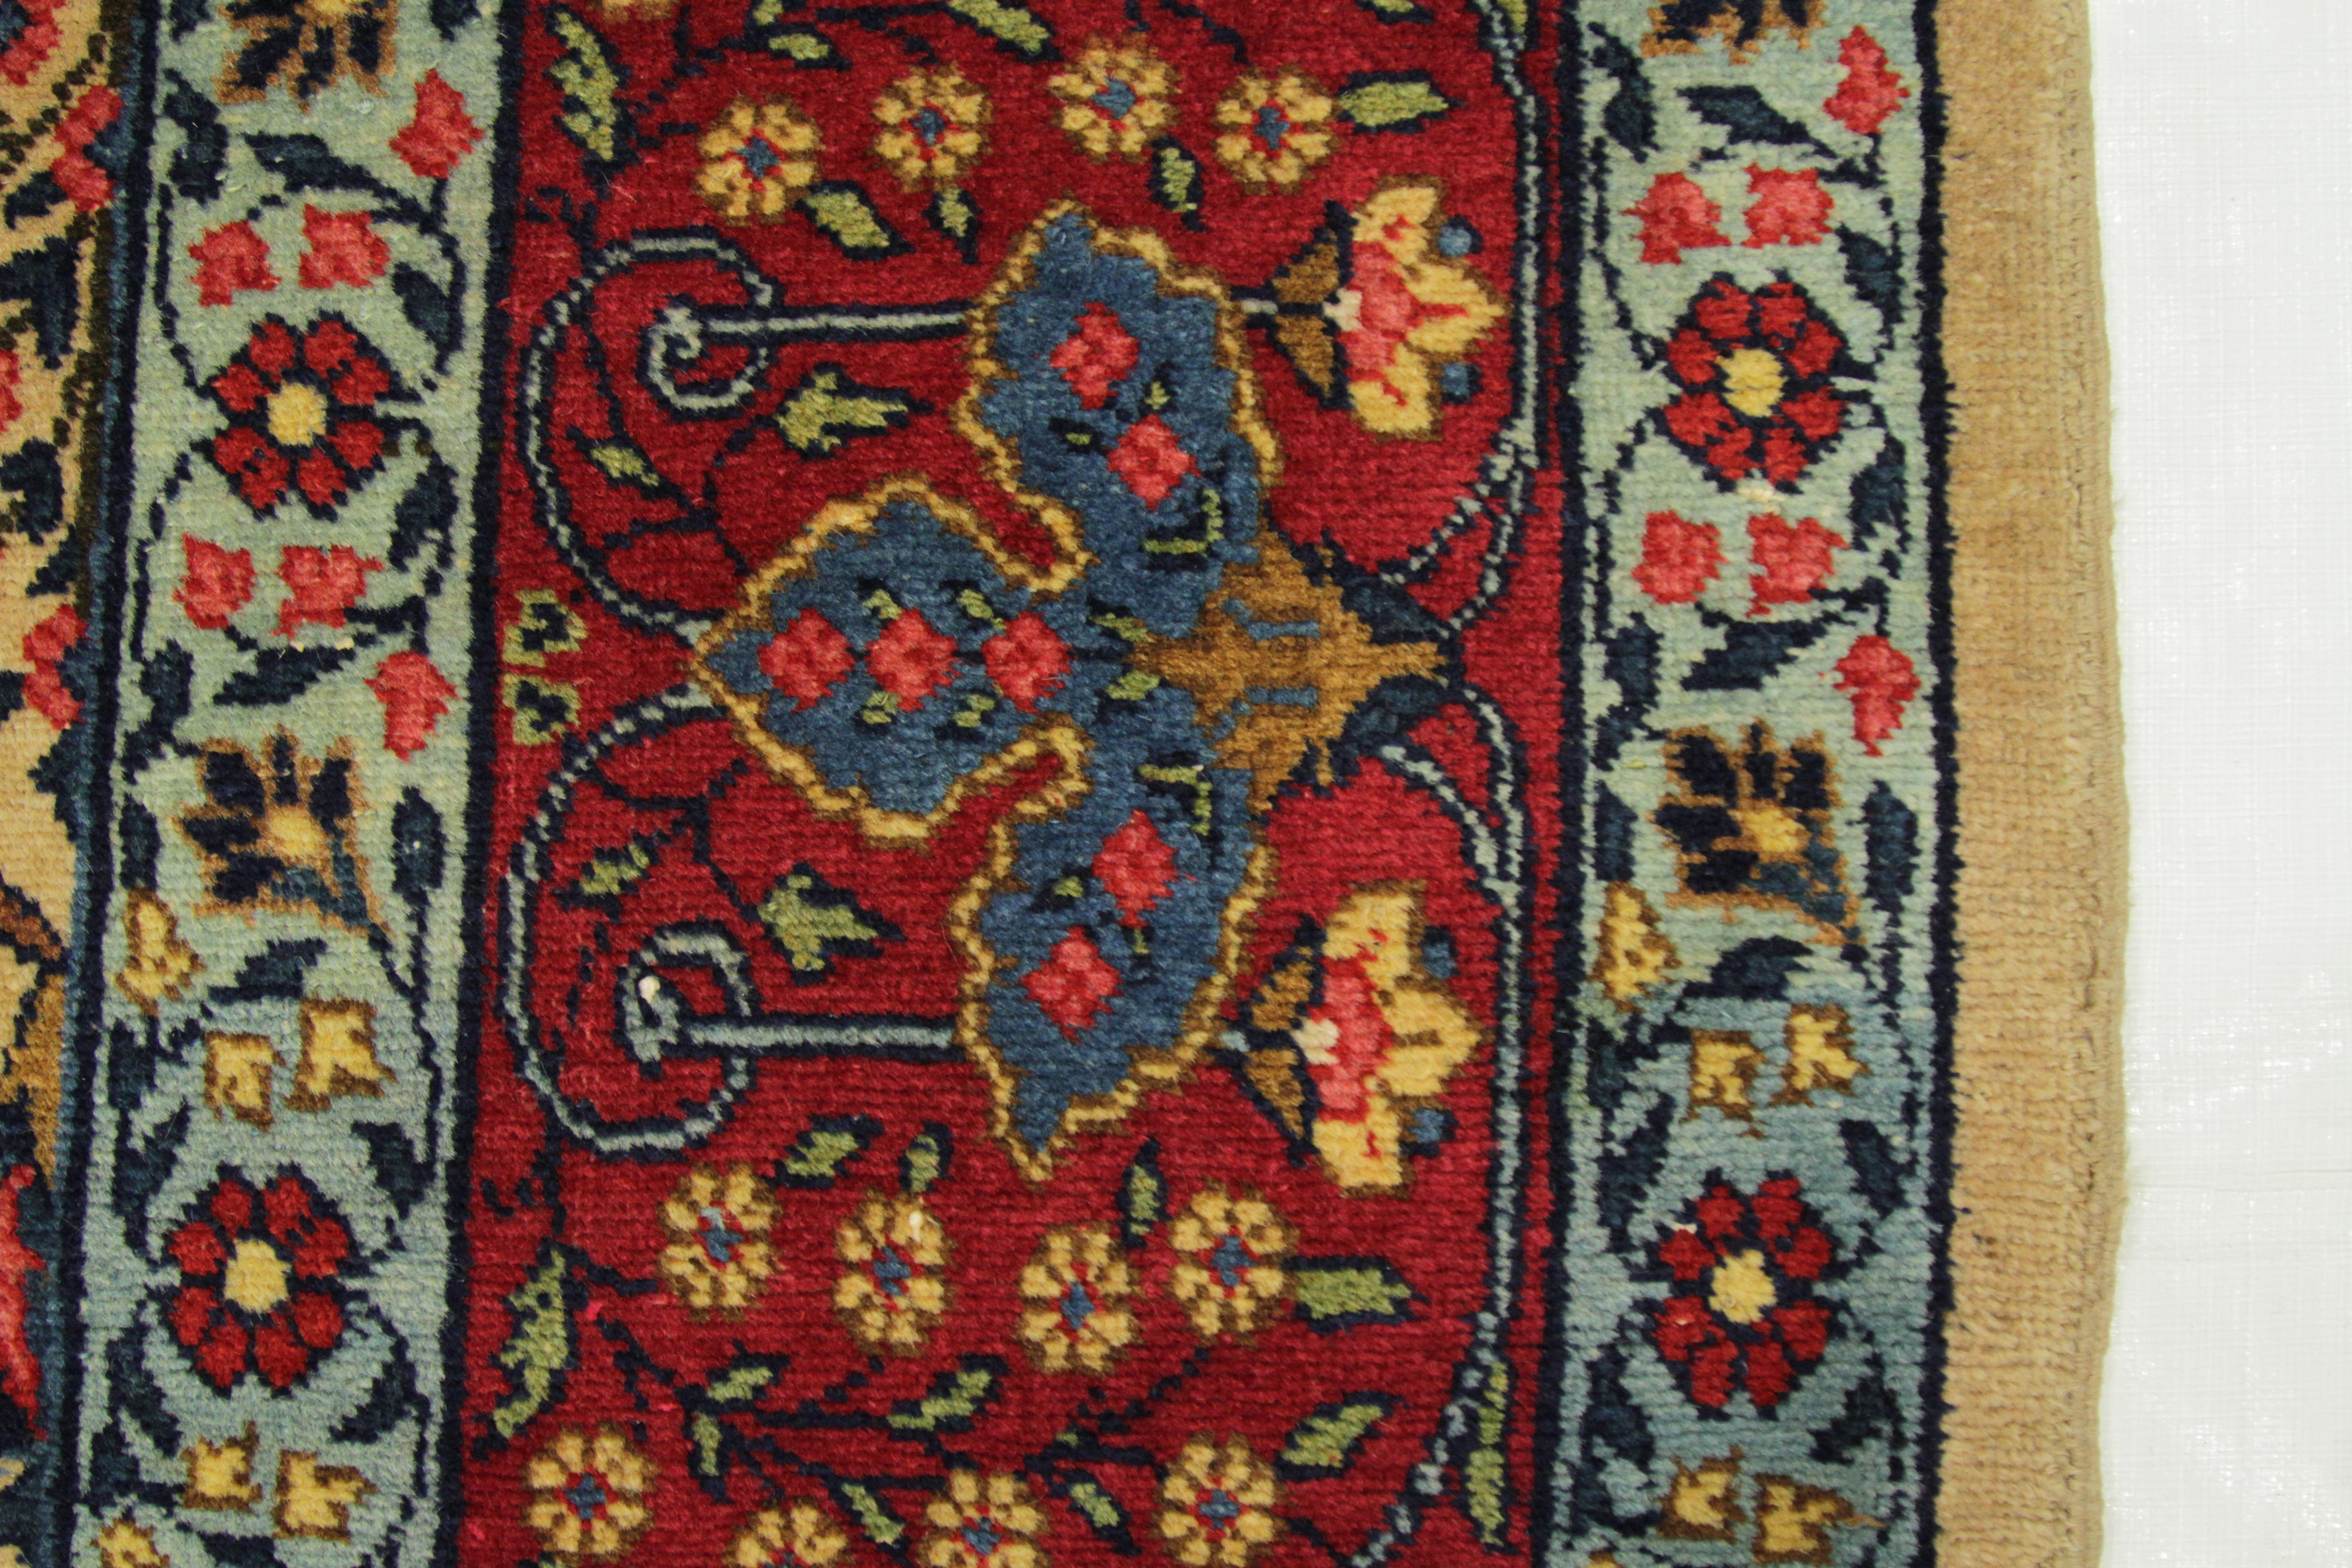 Wool 1950s Antique Persian Tabriz Rug with Lush ‘Herati’ Patterns in Red and Black For Sale